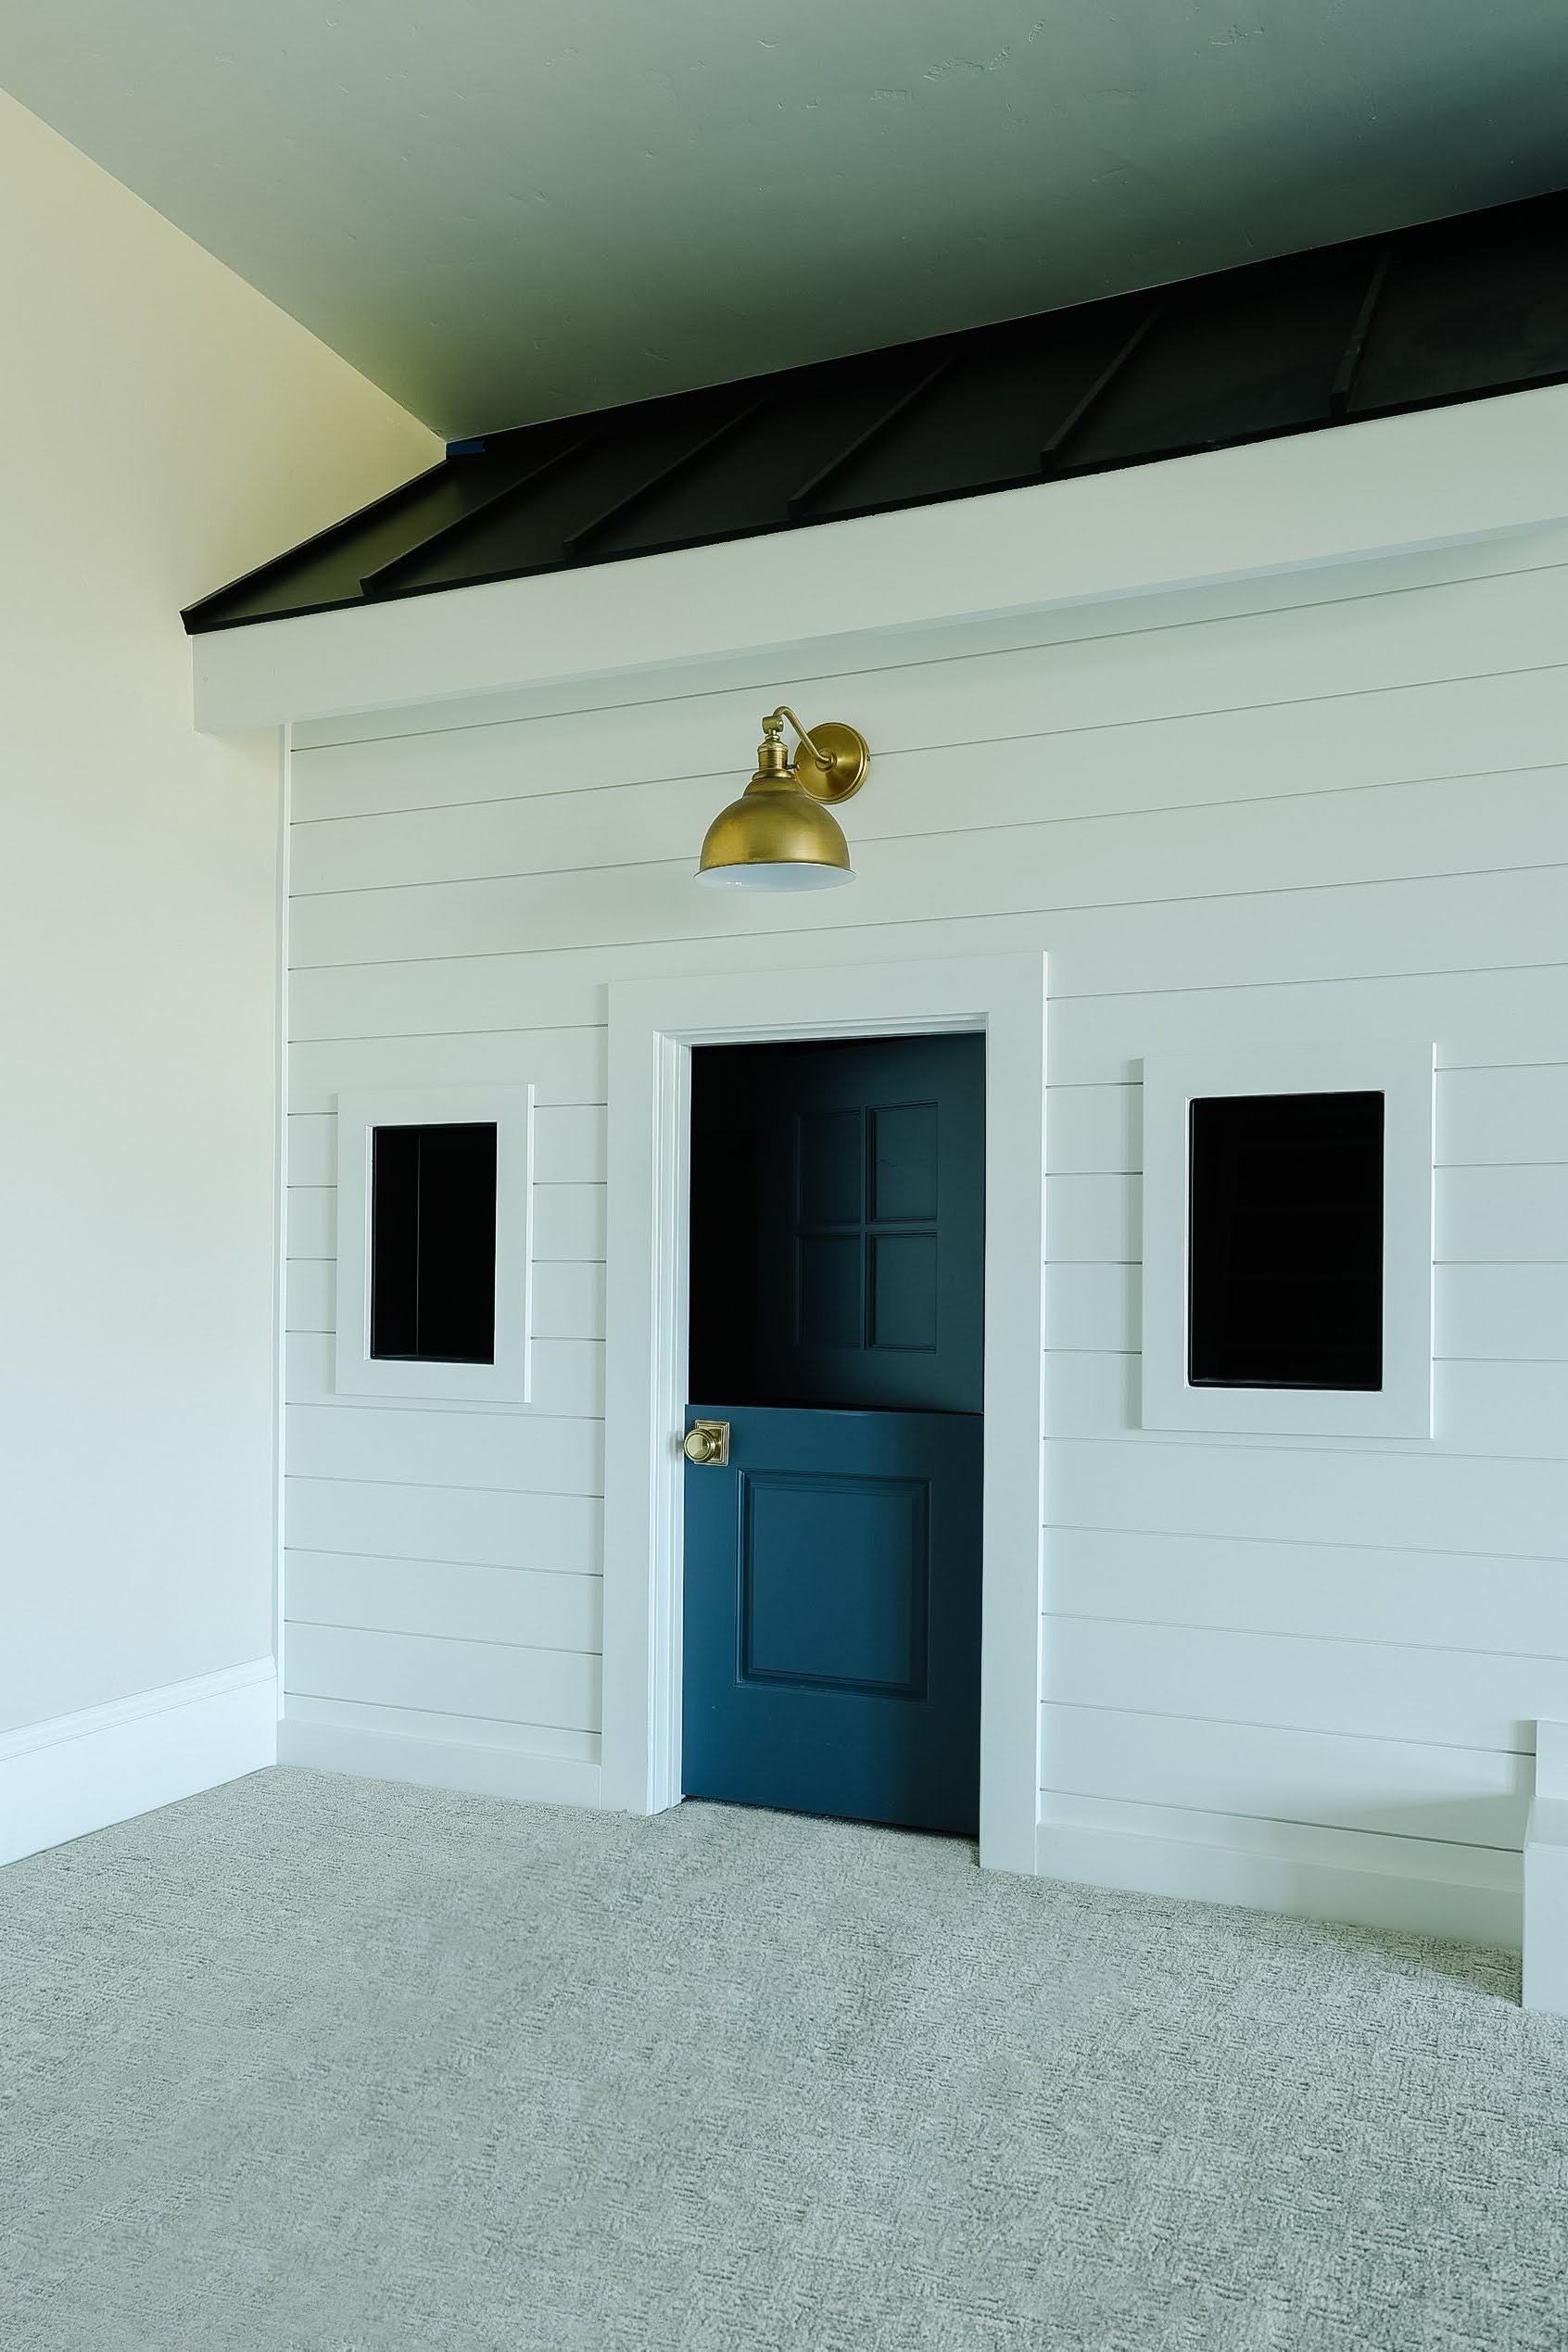  Parents of small children dream of a play area where their children’s imaginations will take them anywhere.&nbsp; Children’s play area Dutch door play house golden sconce light black and white #playarea #builtinplayhouse #shiplap #shingledplayhouse 